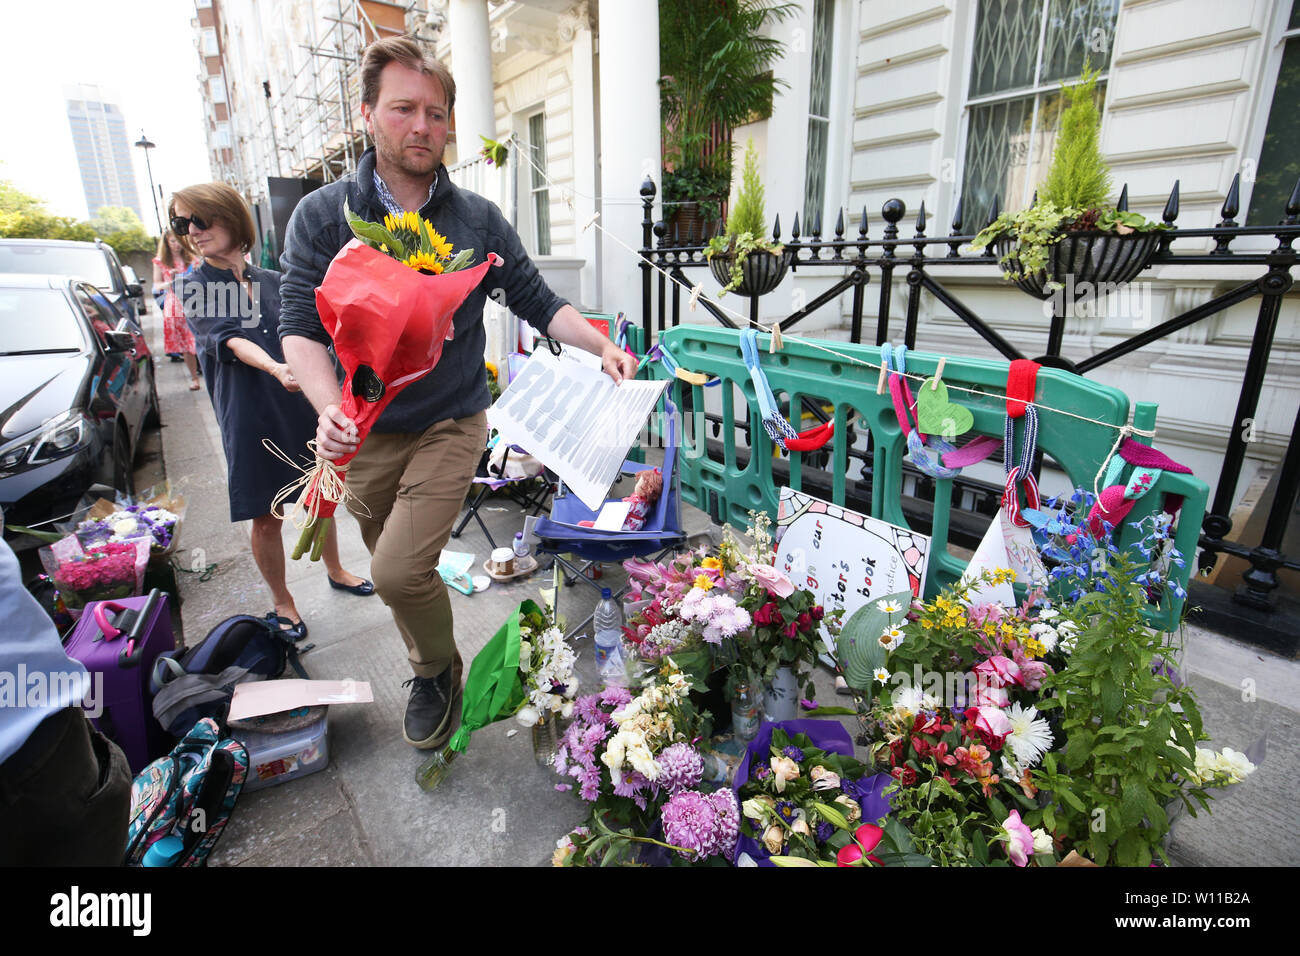 Richard Ratcliffe, the husband of detained Nazanin Zaghari Ratcliffe, takes down tributes left outside the Iranian Embassy in Knightsbridge, London. Ratcliffe has today ended his hunger strike after his imprisoned wife ended her own hunger strike after 15 days in an Iran jail. Stock Photo